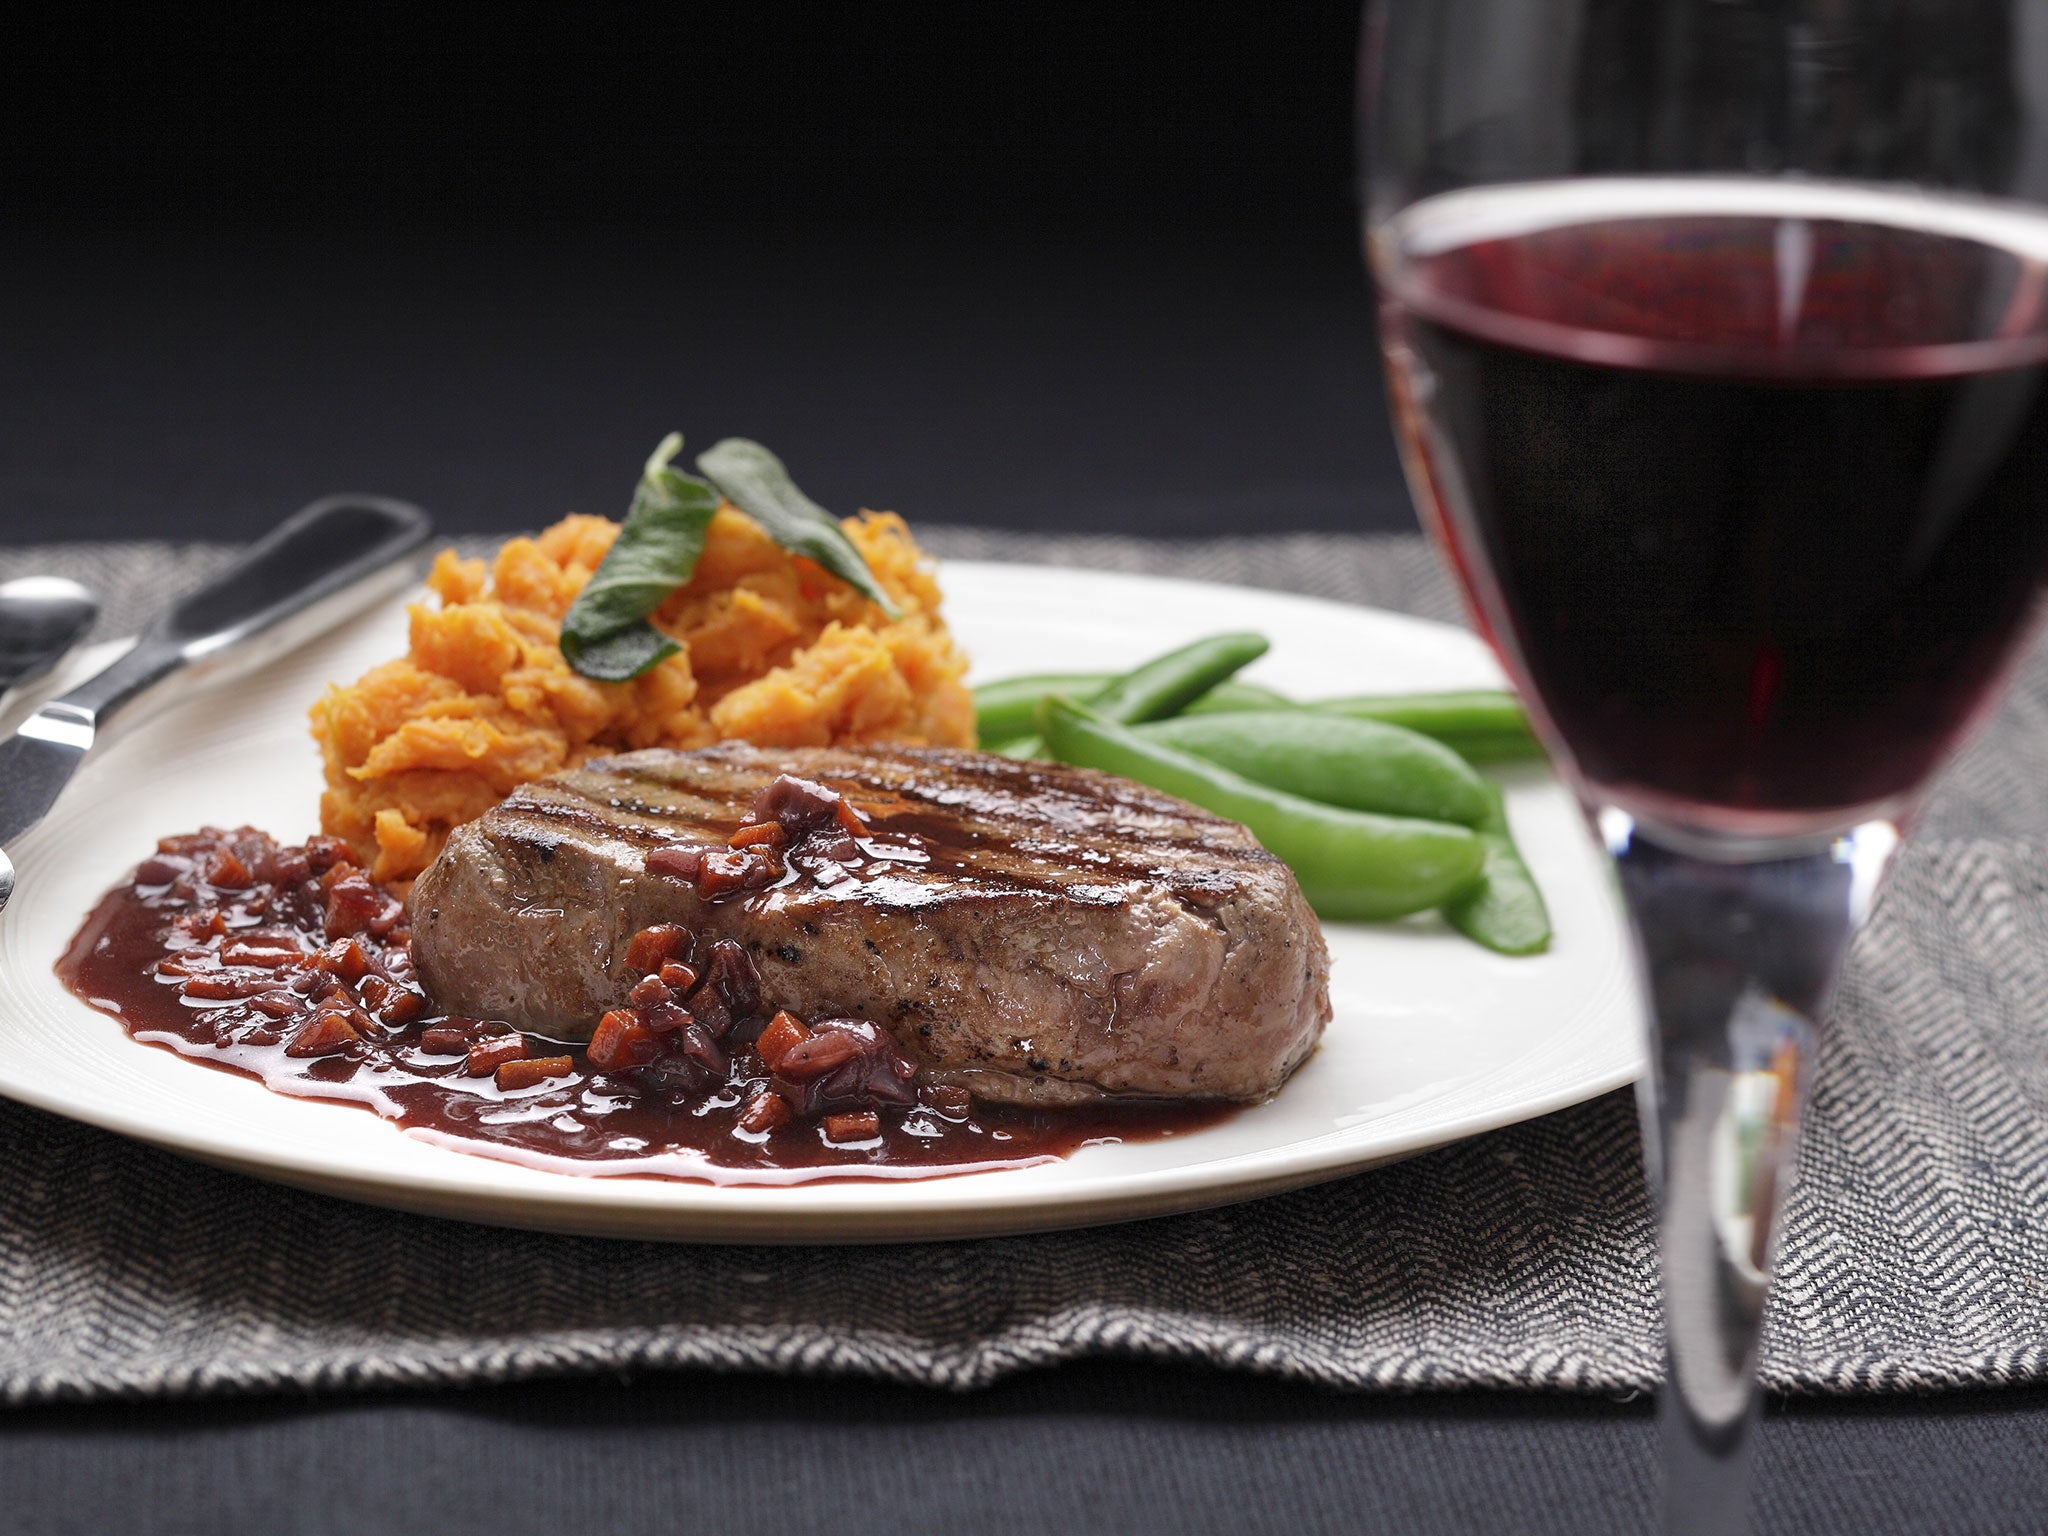 An excuse to tuck in: Alcohol and meat could aid male fertility